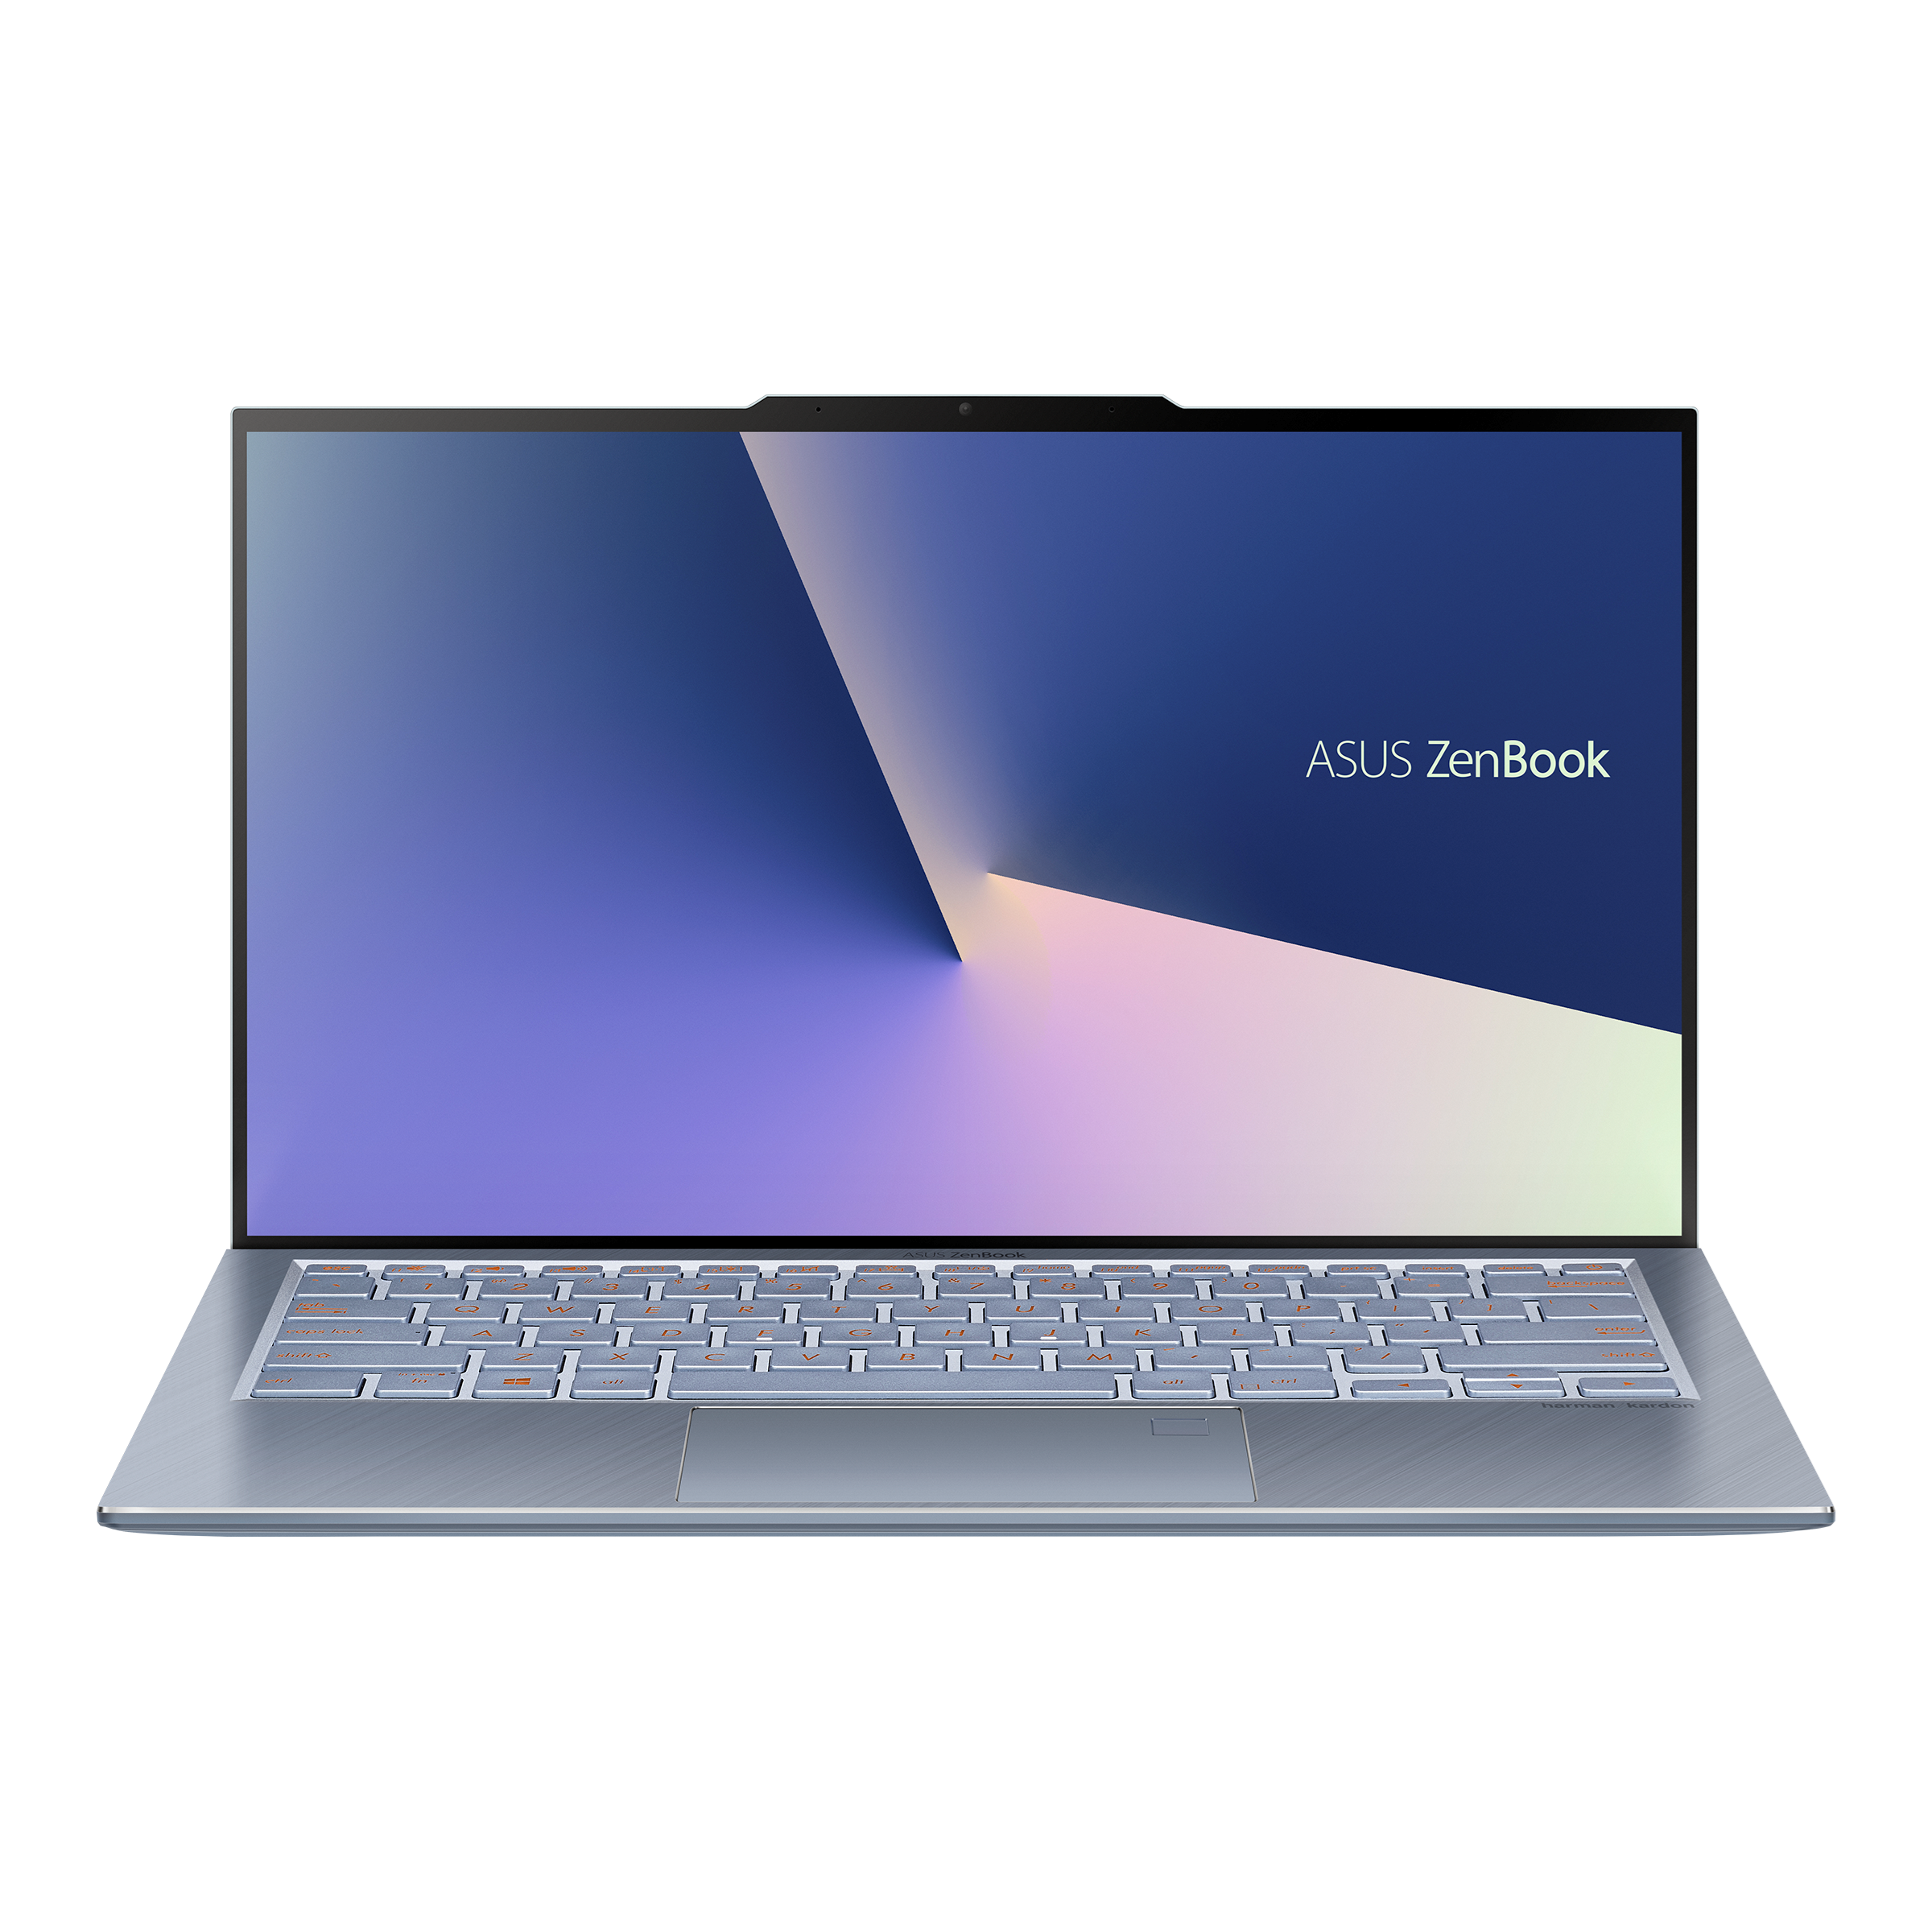 Maria baard Mellow Laptops For Work - All series｜ASUS USA